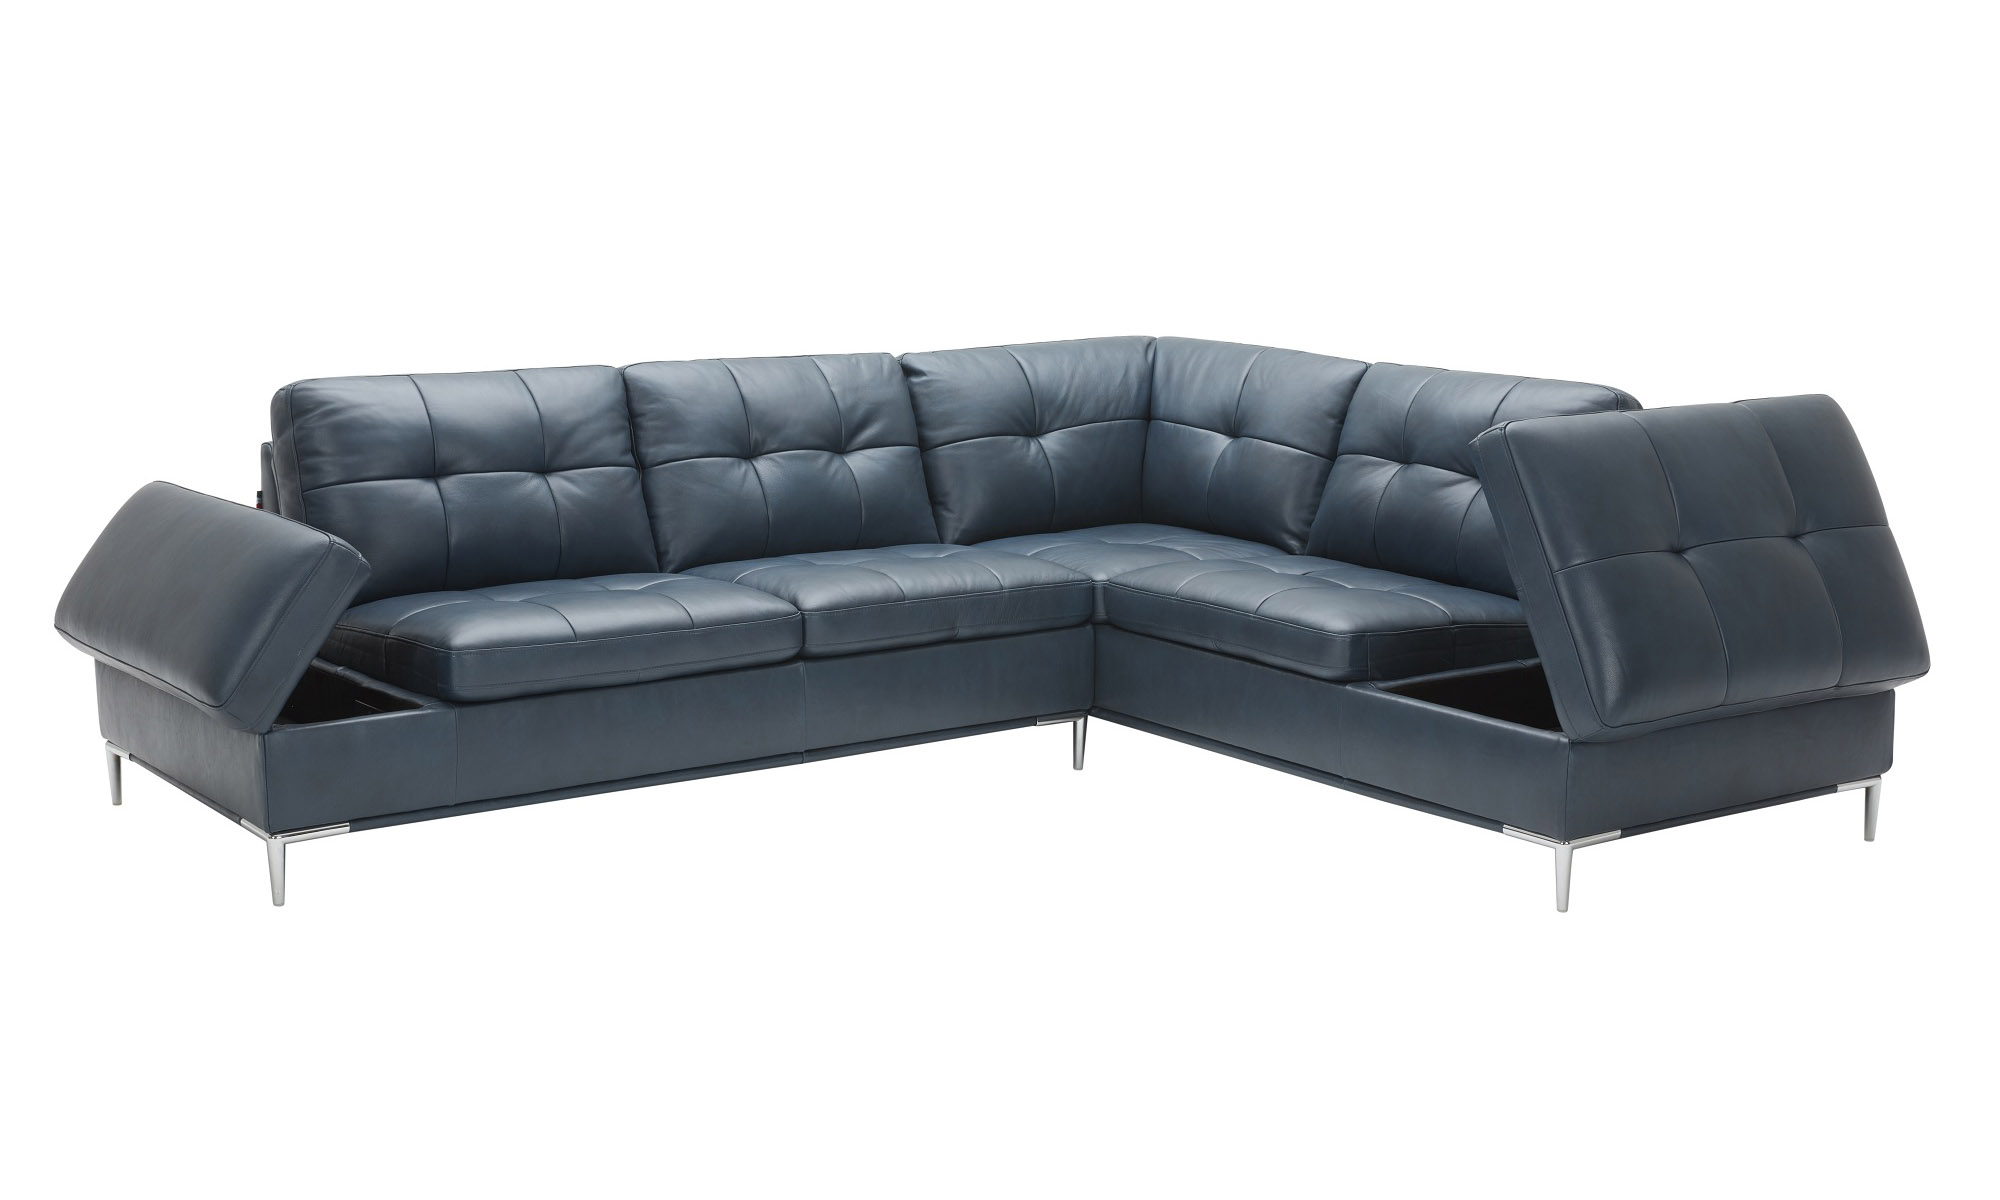 Advanced Adjustable Tufted Leather Corner Sectional Sofa with Pillows